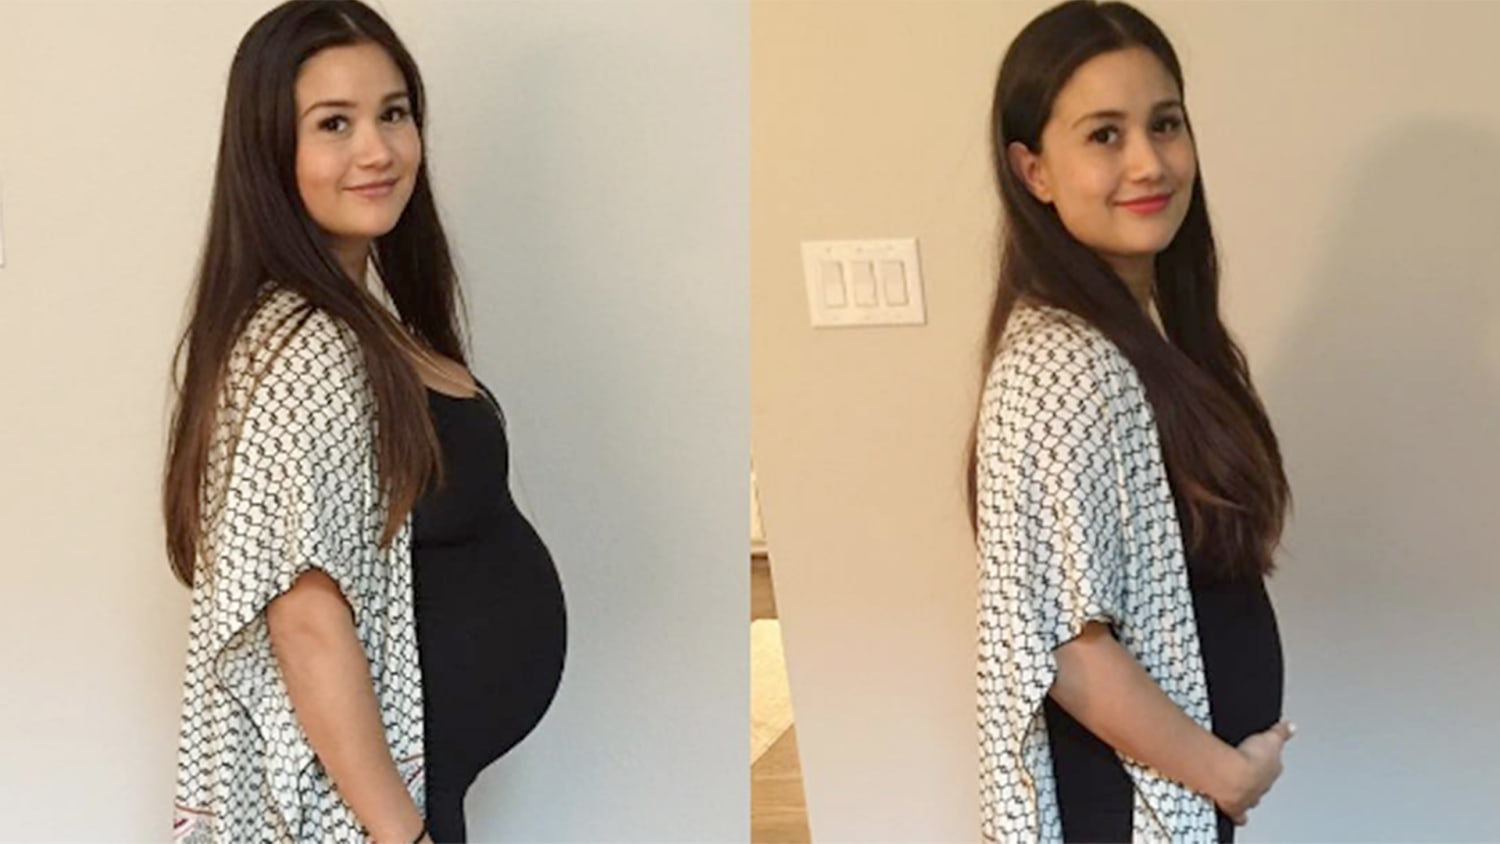 Catherine Giudici shows off her post-baby belly - TODAY.com1920 x 1080